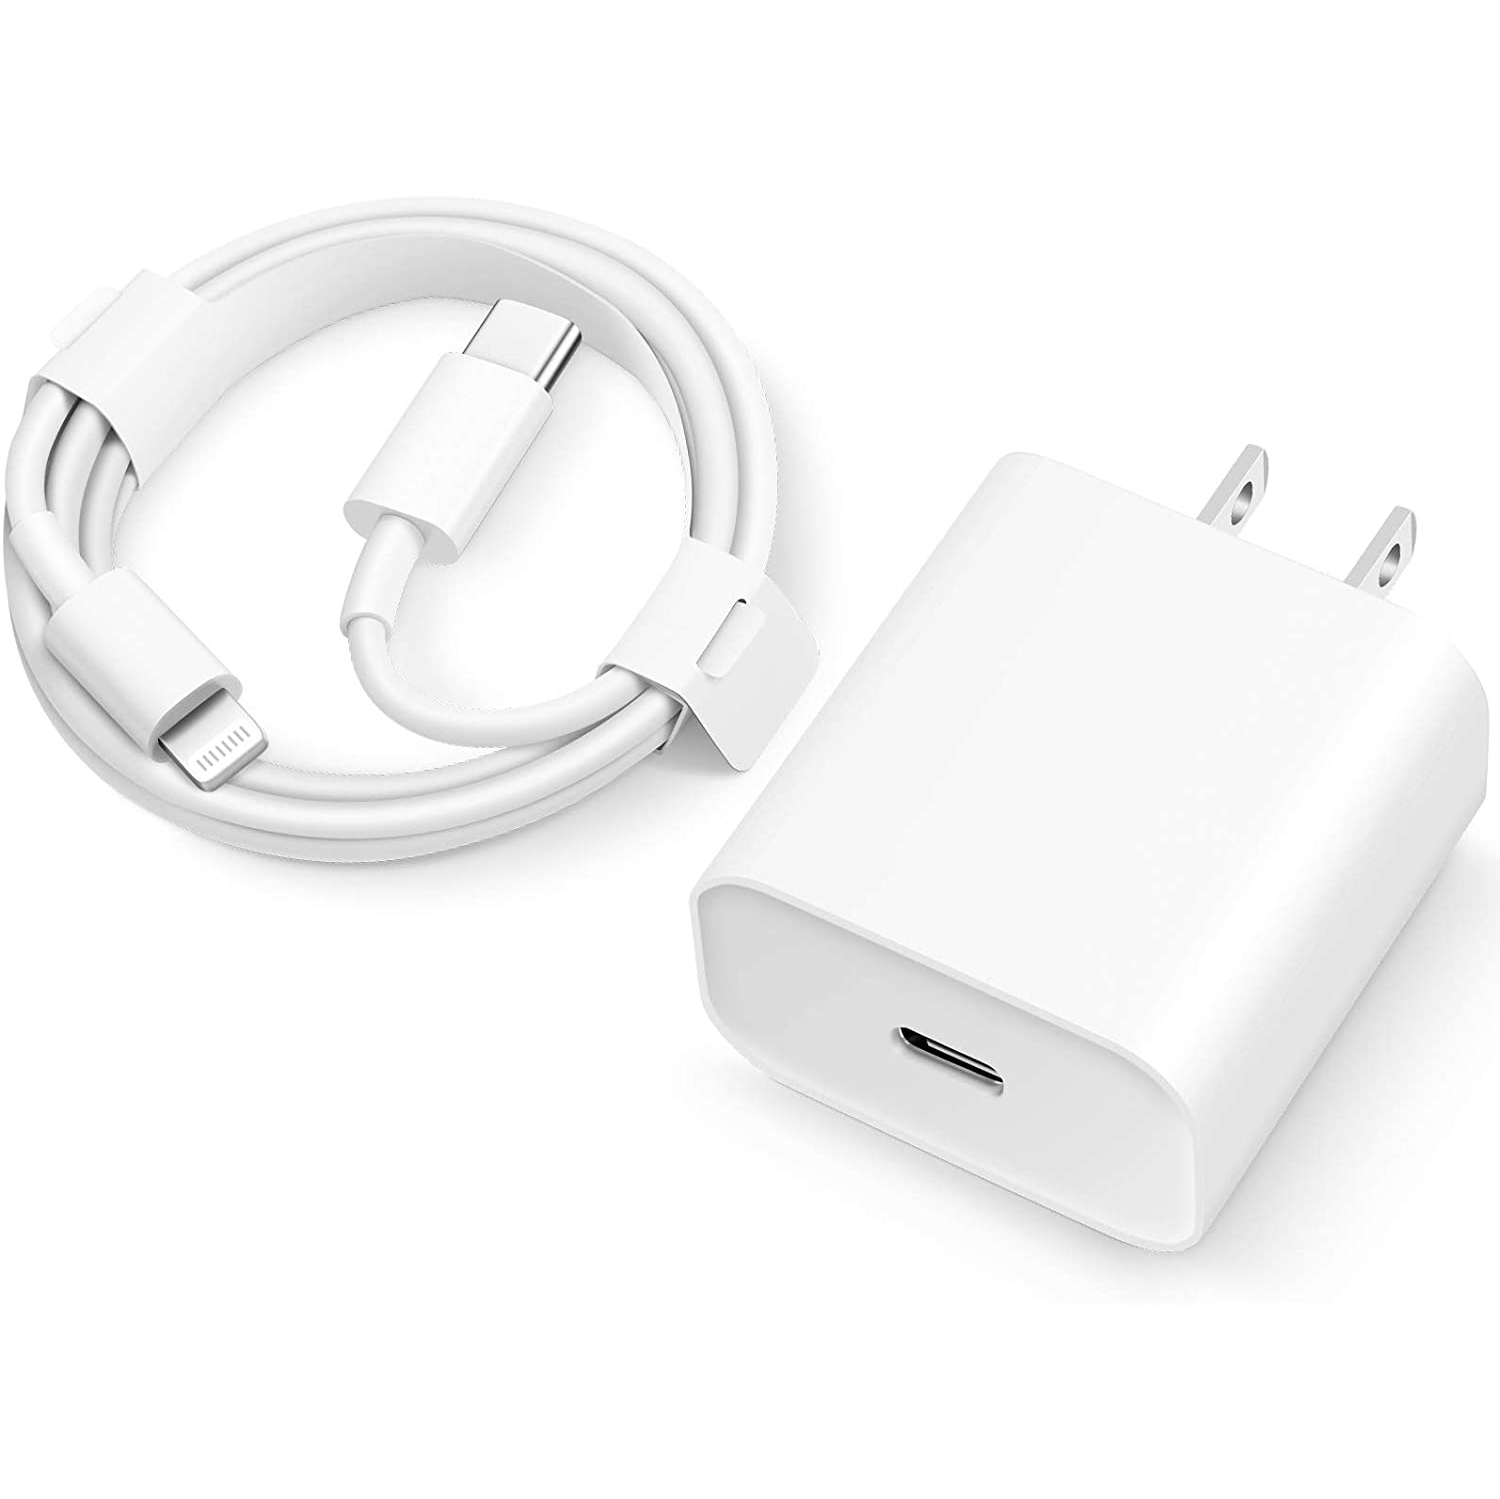 Apple 20W PD 3.0 Fast USB-C Charger with 4FT Charging Cable for iPhone 12